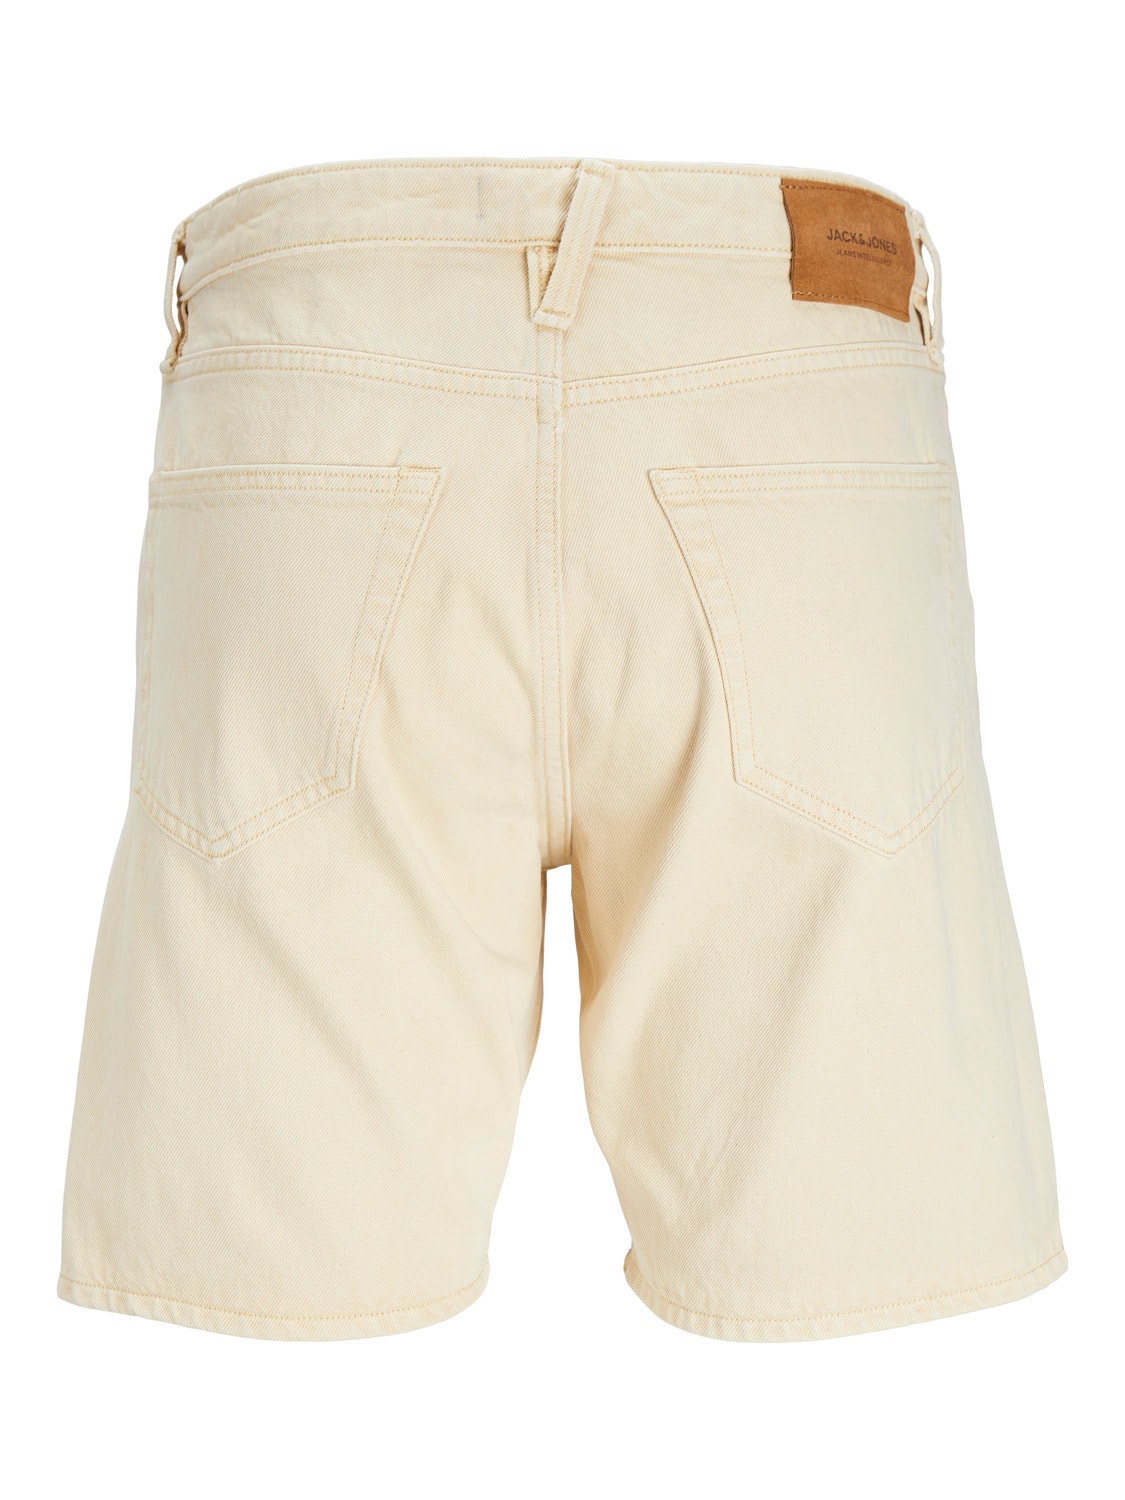 Jack & Jones Relaxed Fit Jeans Shorts -Biscotti - 12249035